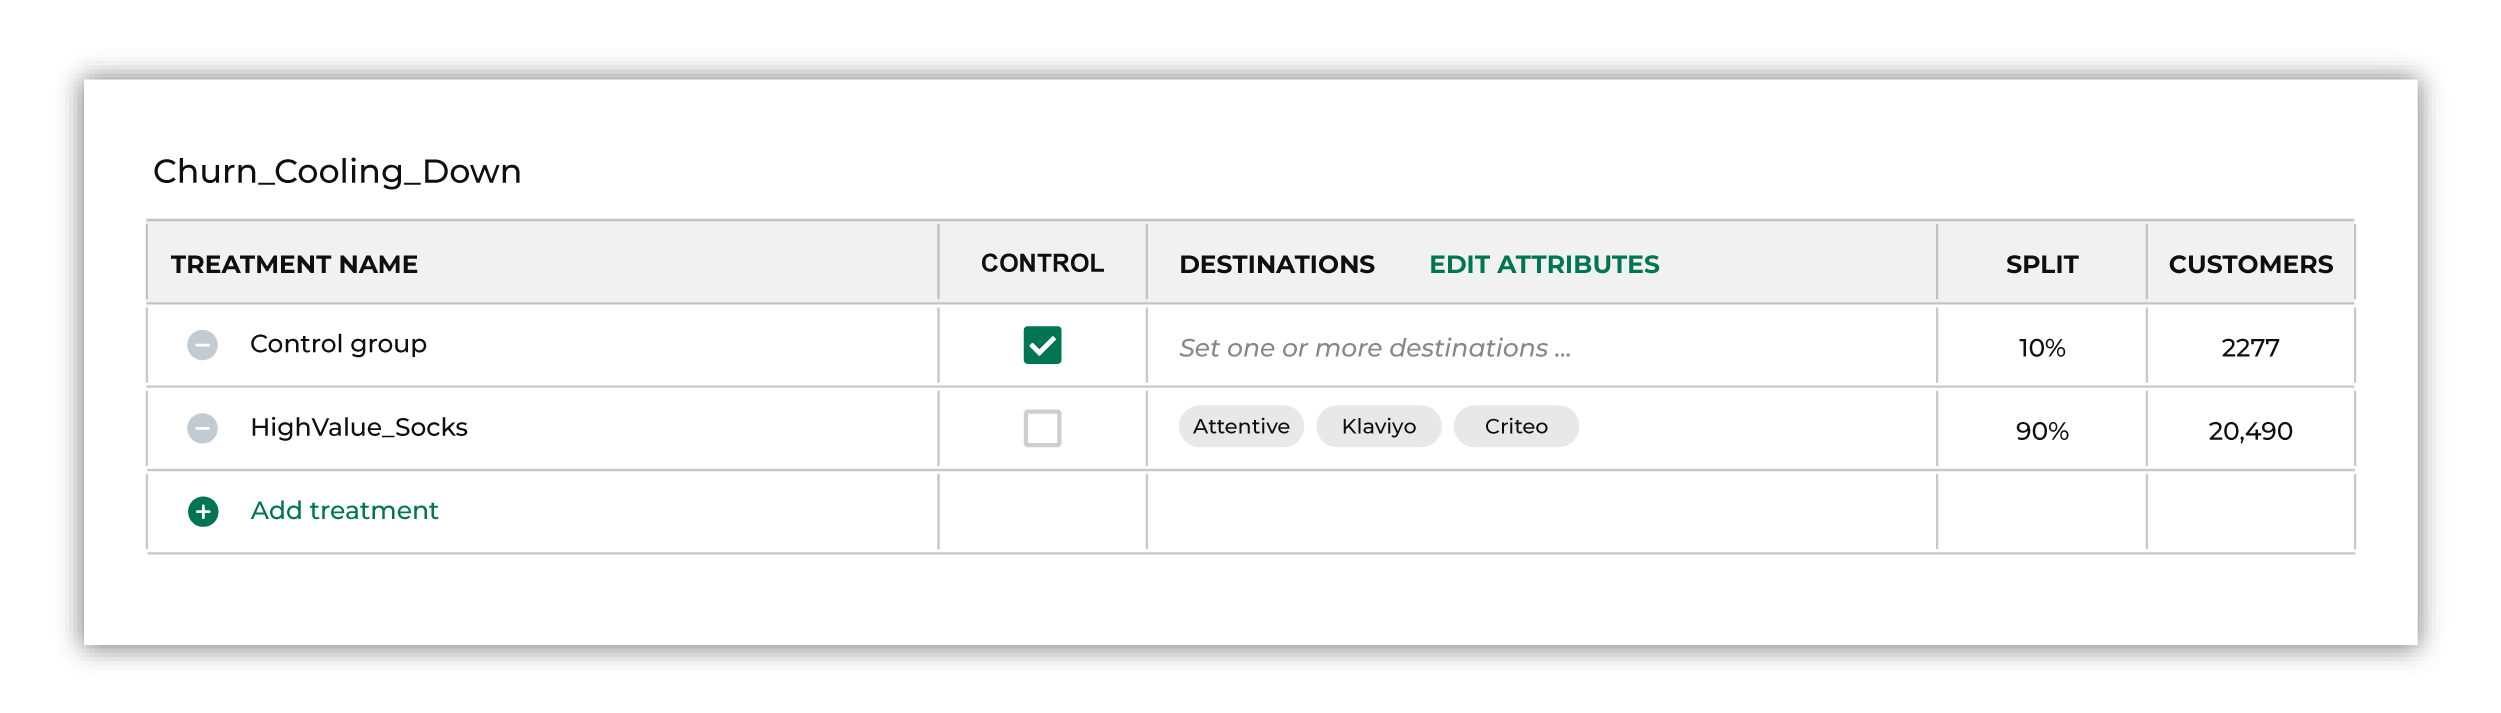 Destinations for customers with a cooling down lifecycle status.